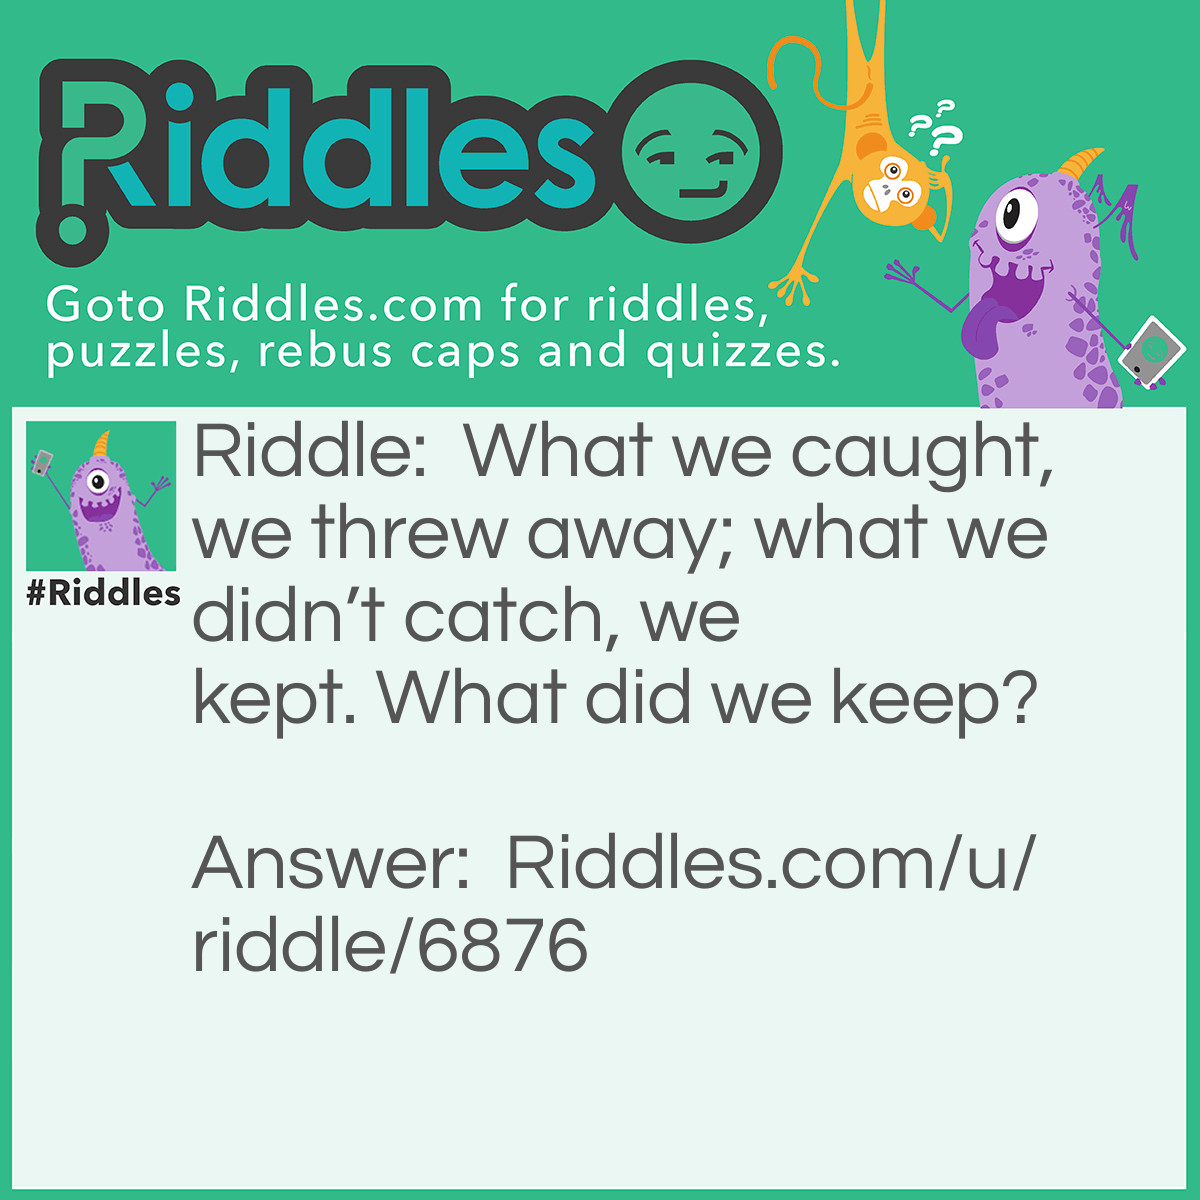 Riddle: What we caught, we threw away; what we didn't catch, we kept. What did we keep? Answer: Lice.